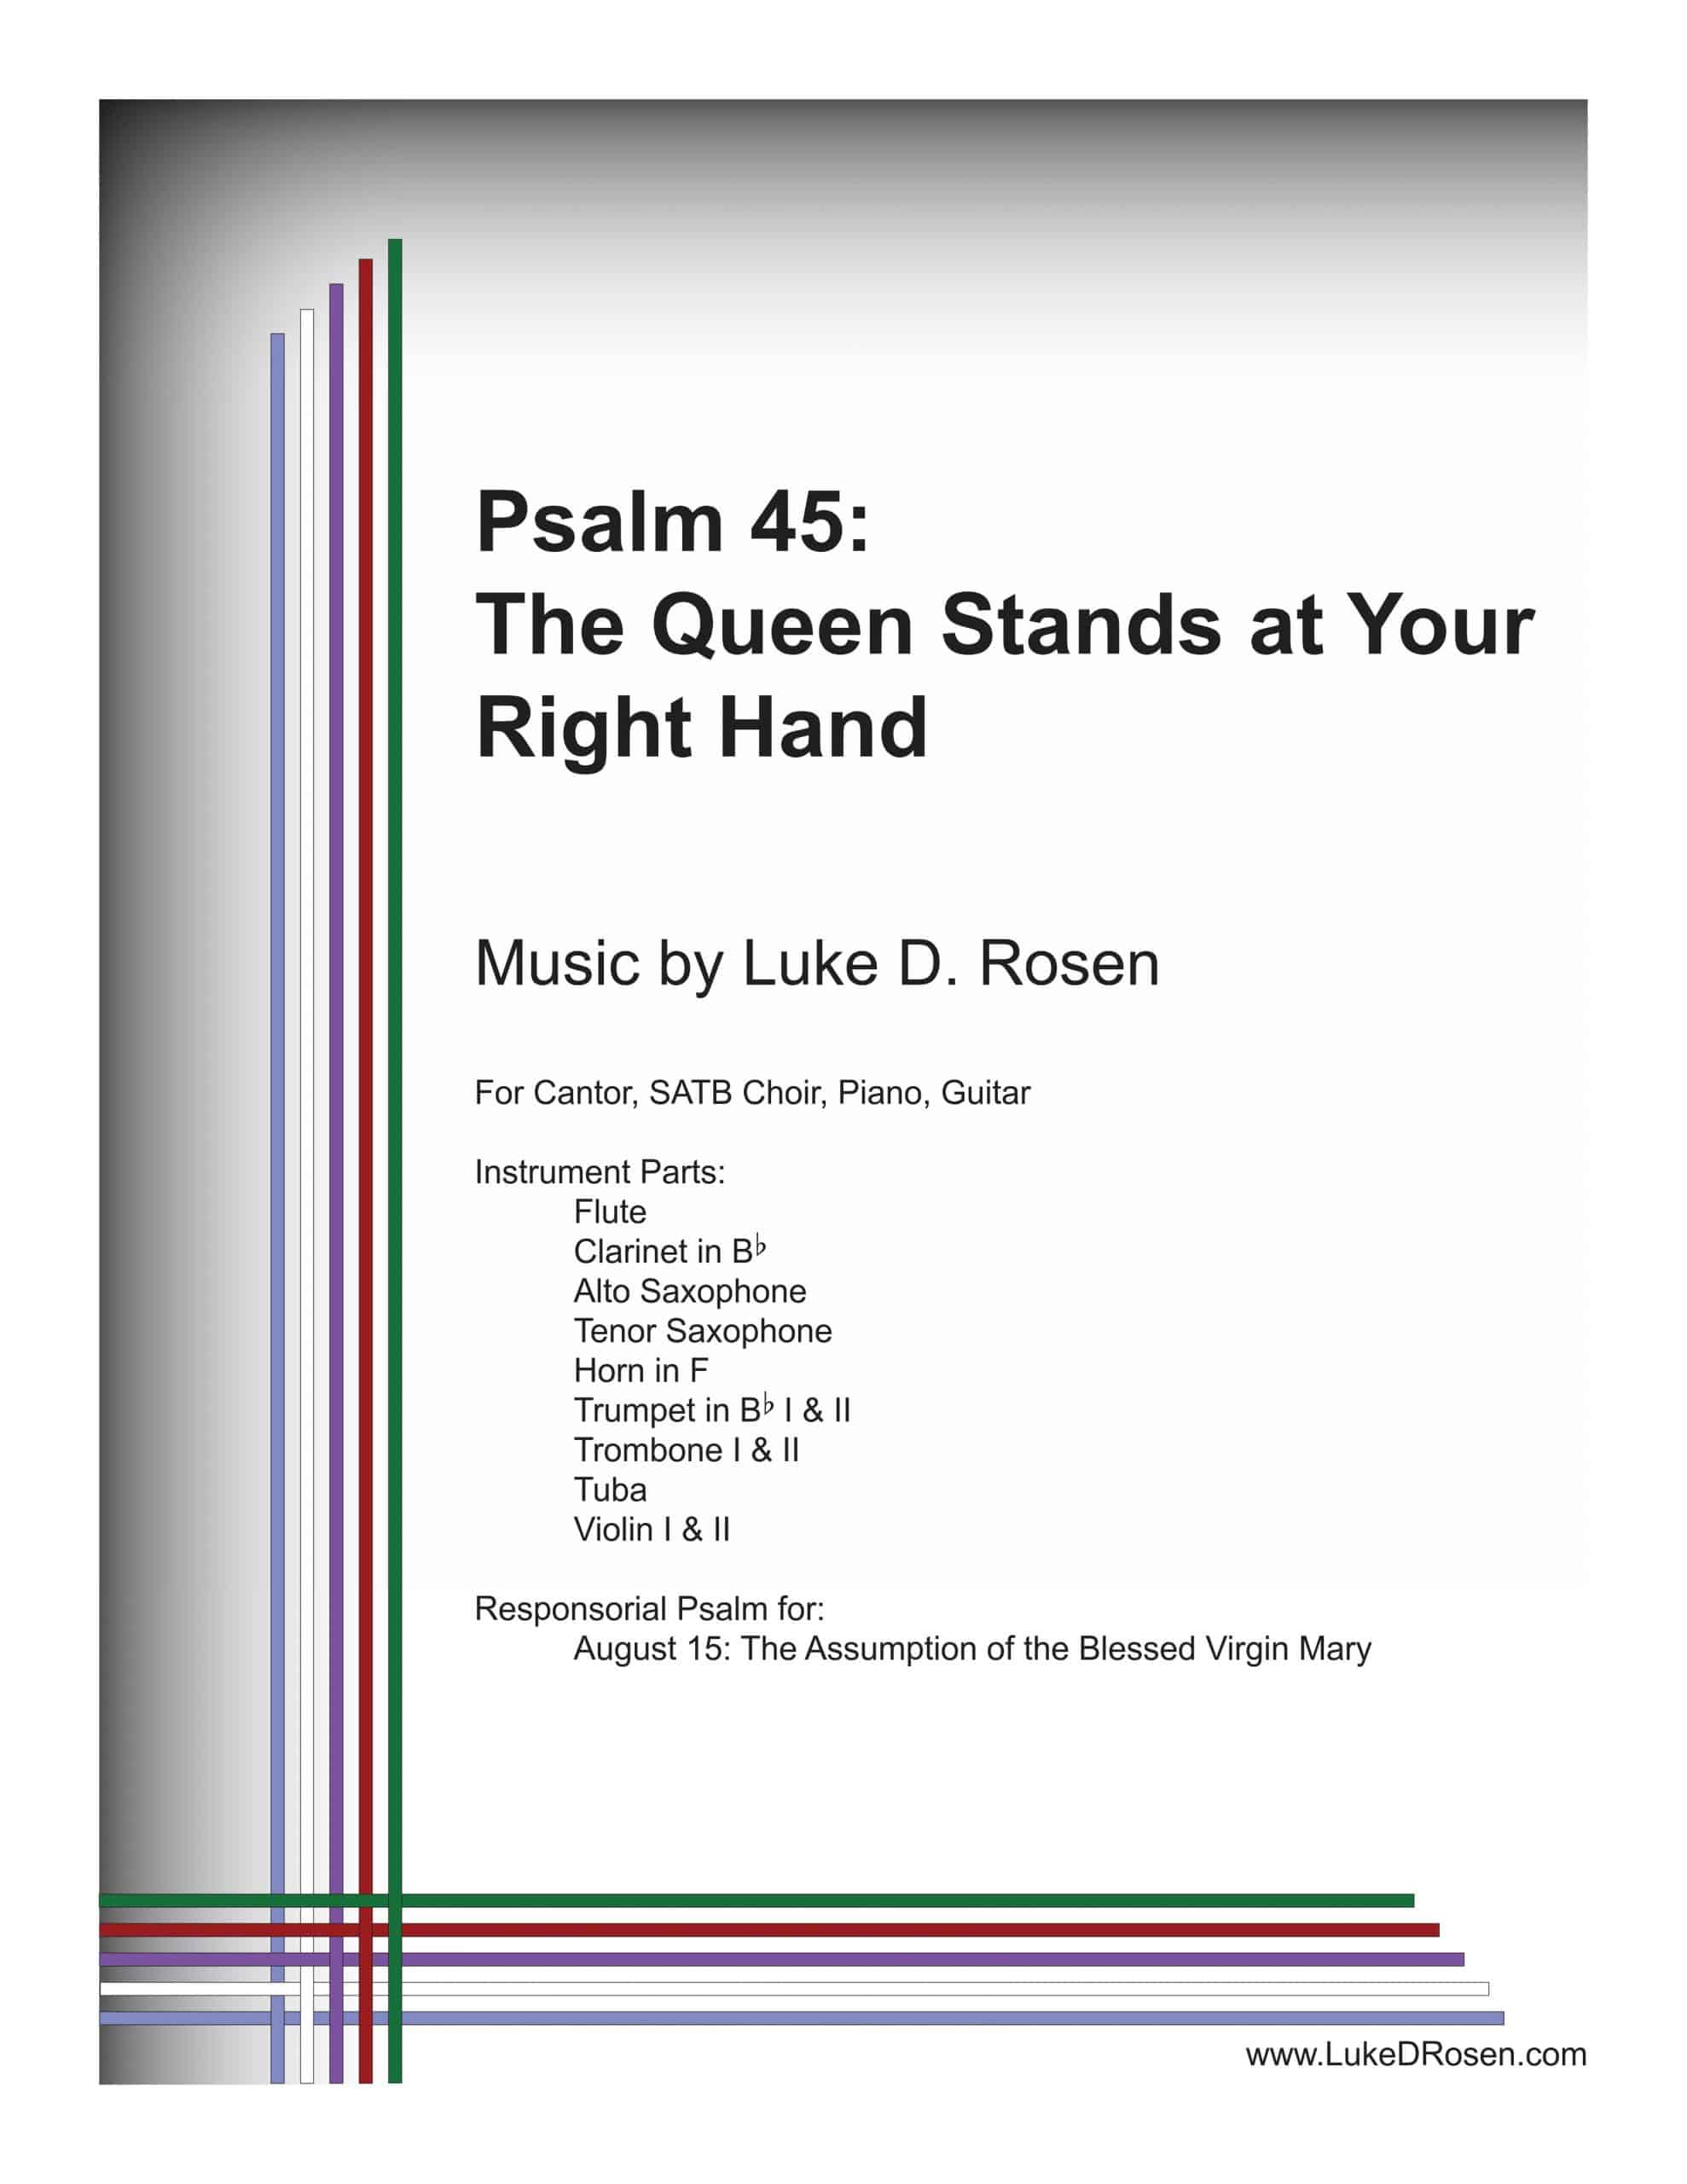 Psalm 45 – The Queen Stands at Your Right Hand (Rosen)